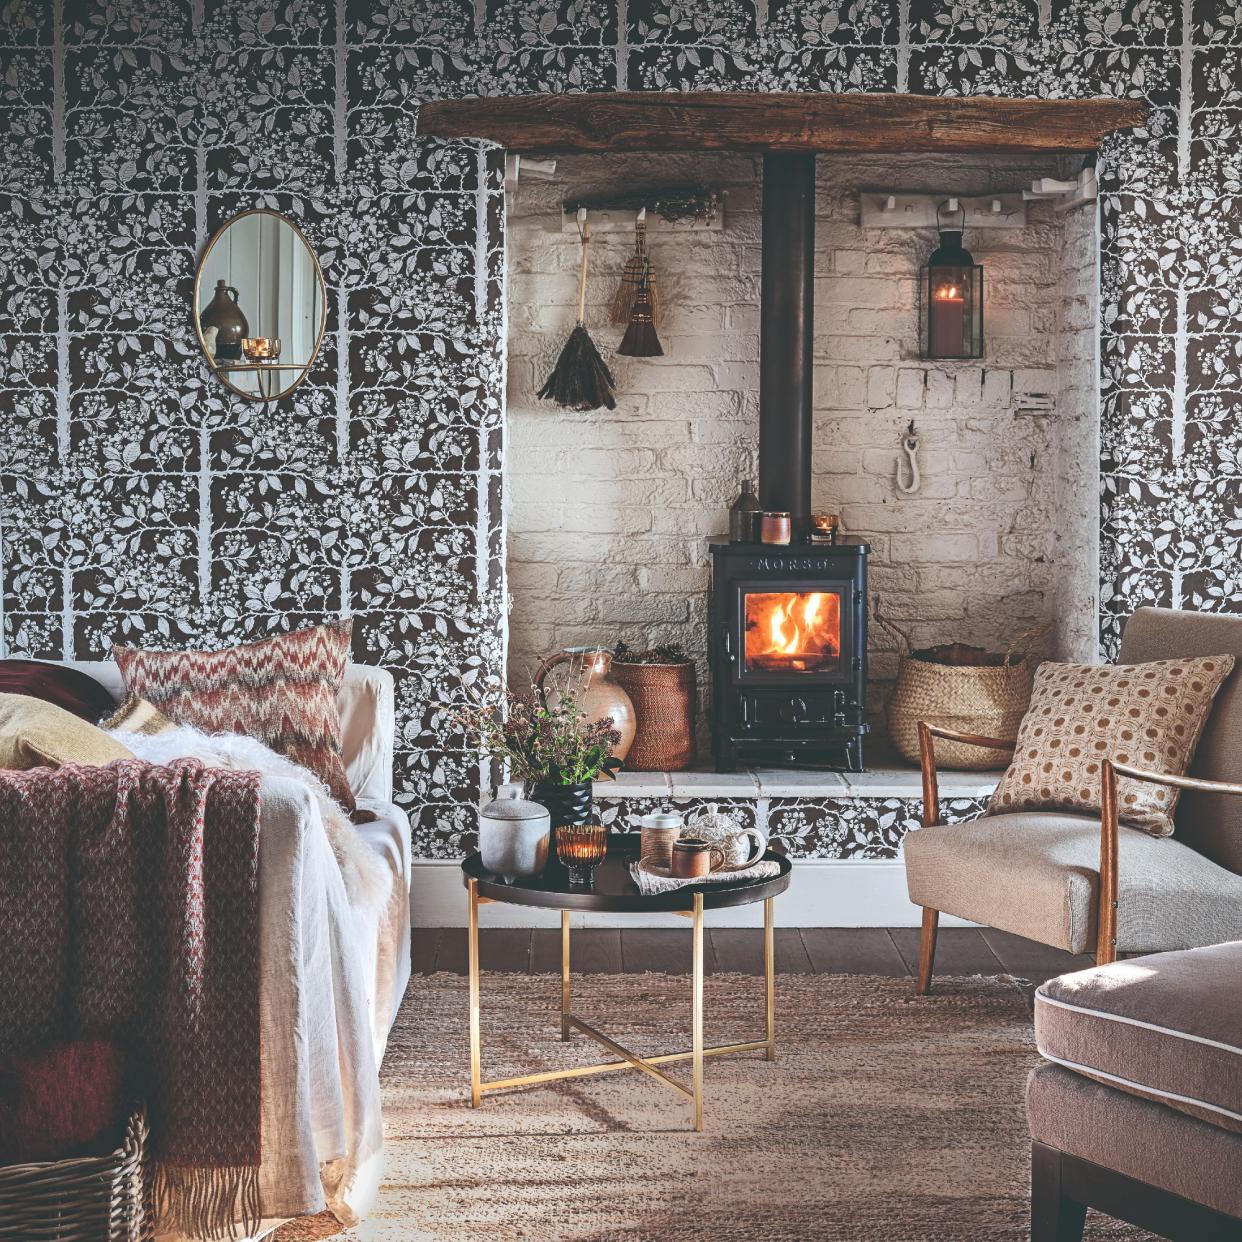  A living room with a fireplace and a floral wallpaper. 